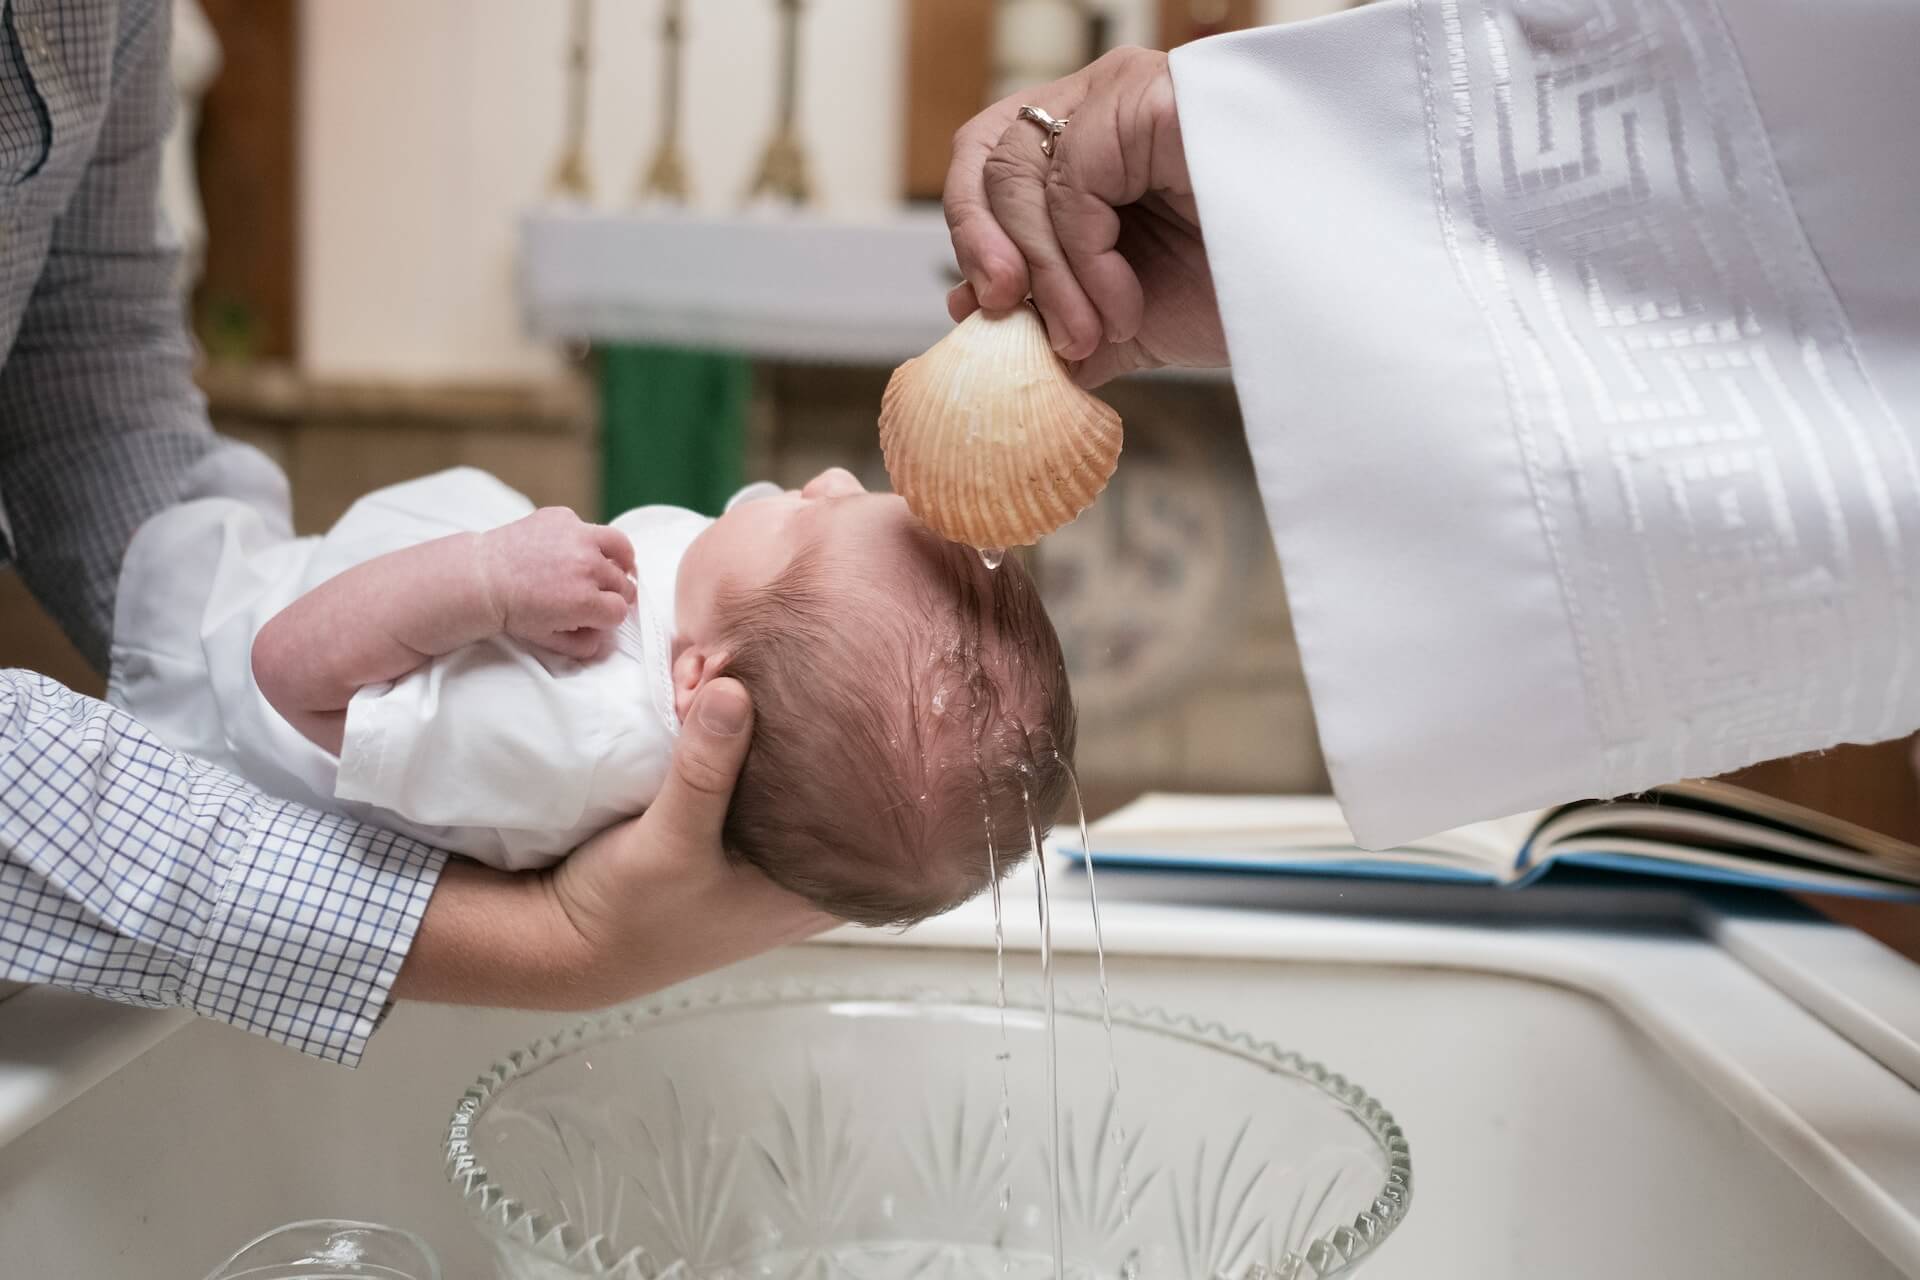 Key Details to Consider When Planning a Baptismal